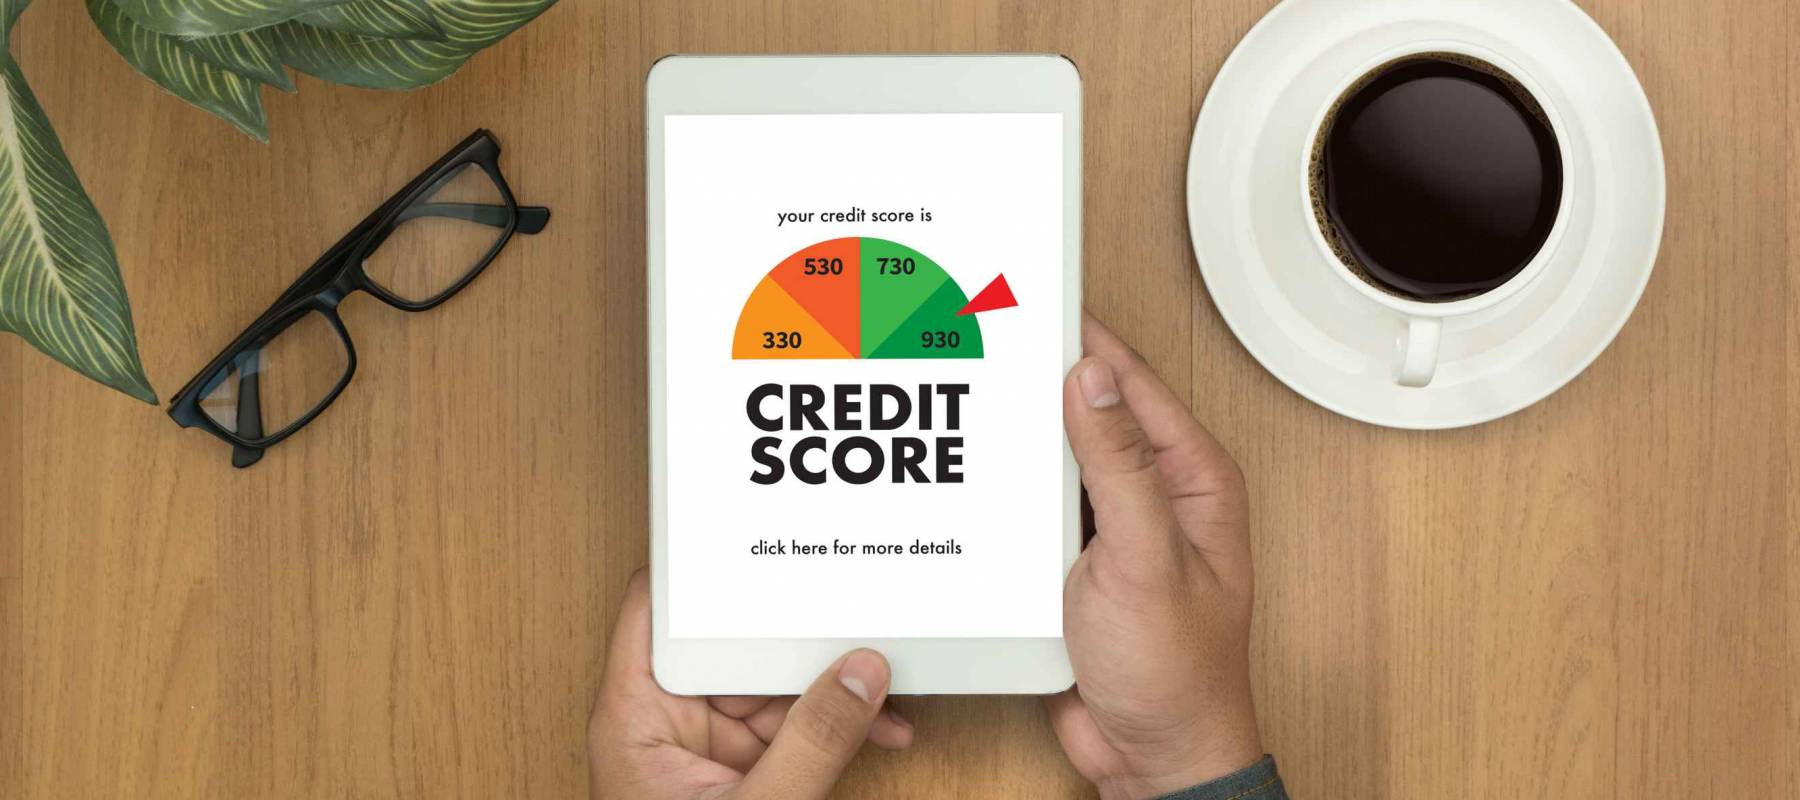 How Long Does It Take to Build a Credit Score?